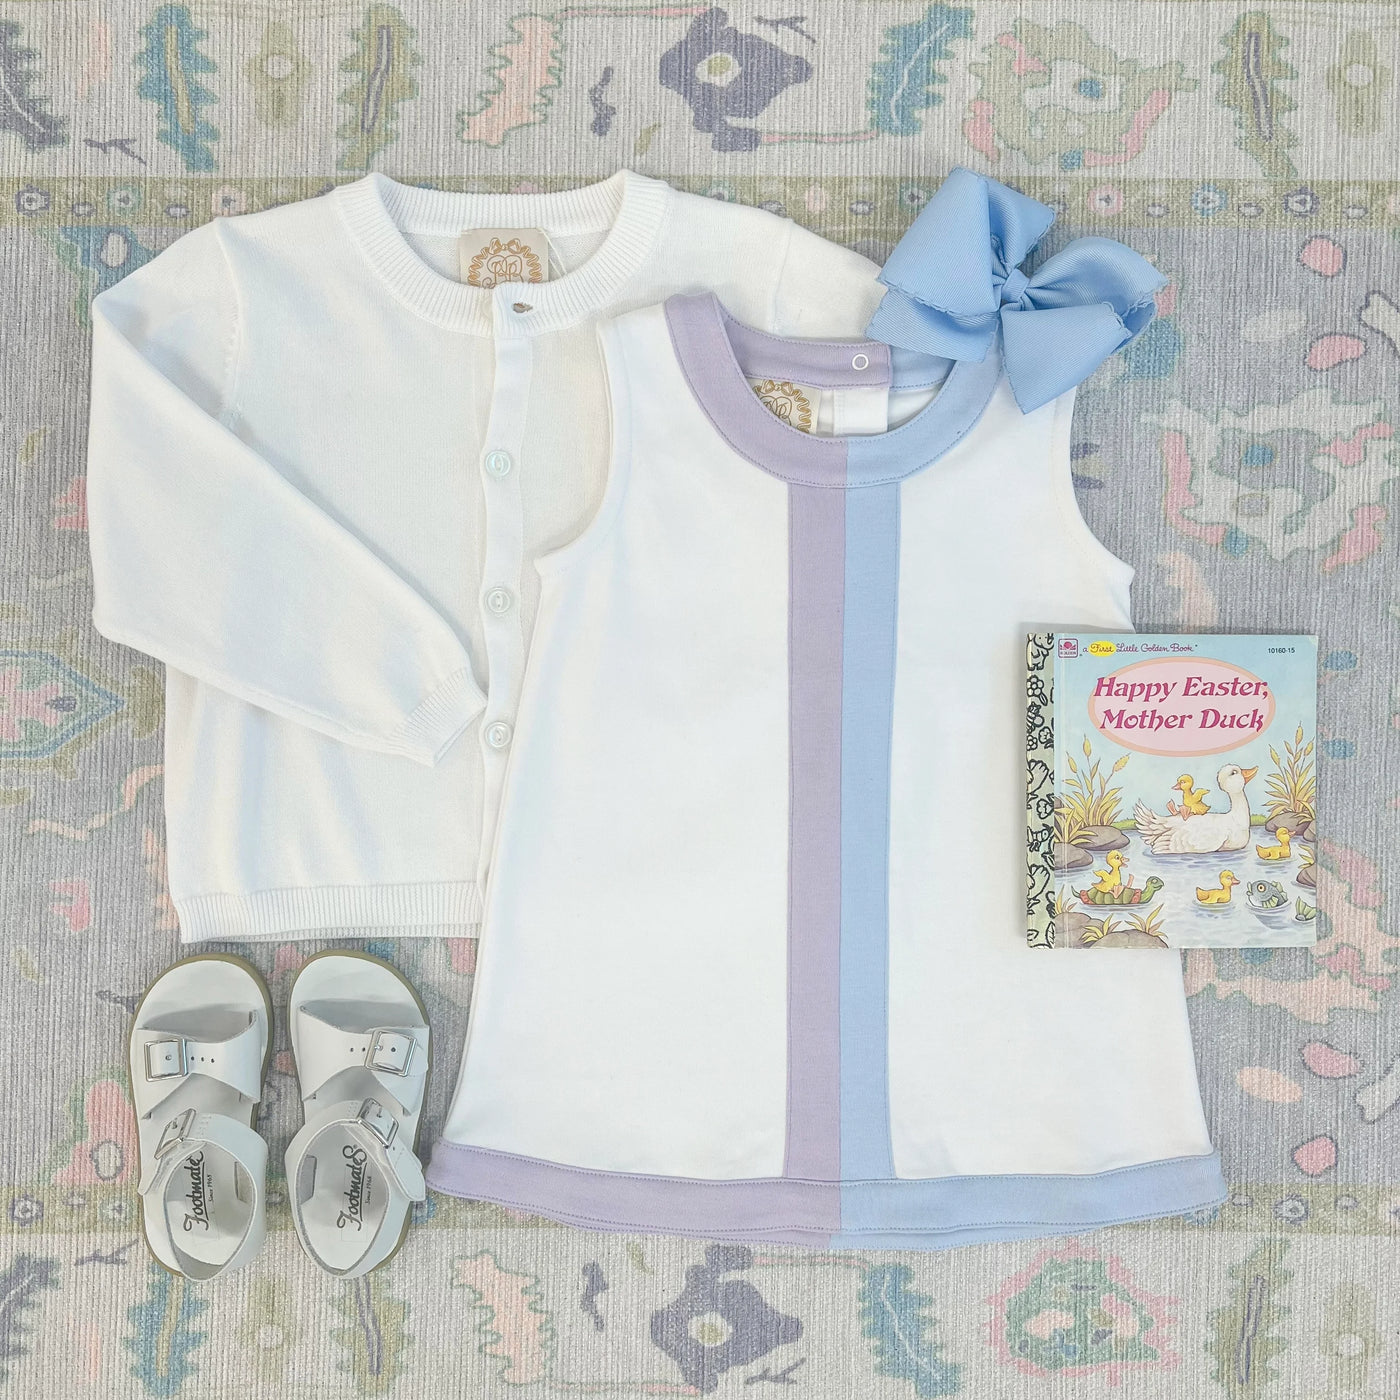 Worth Avenue White with Beale Street Blue and Lauderdale Lavender Daisy Dress